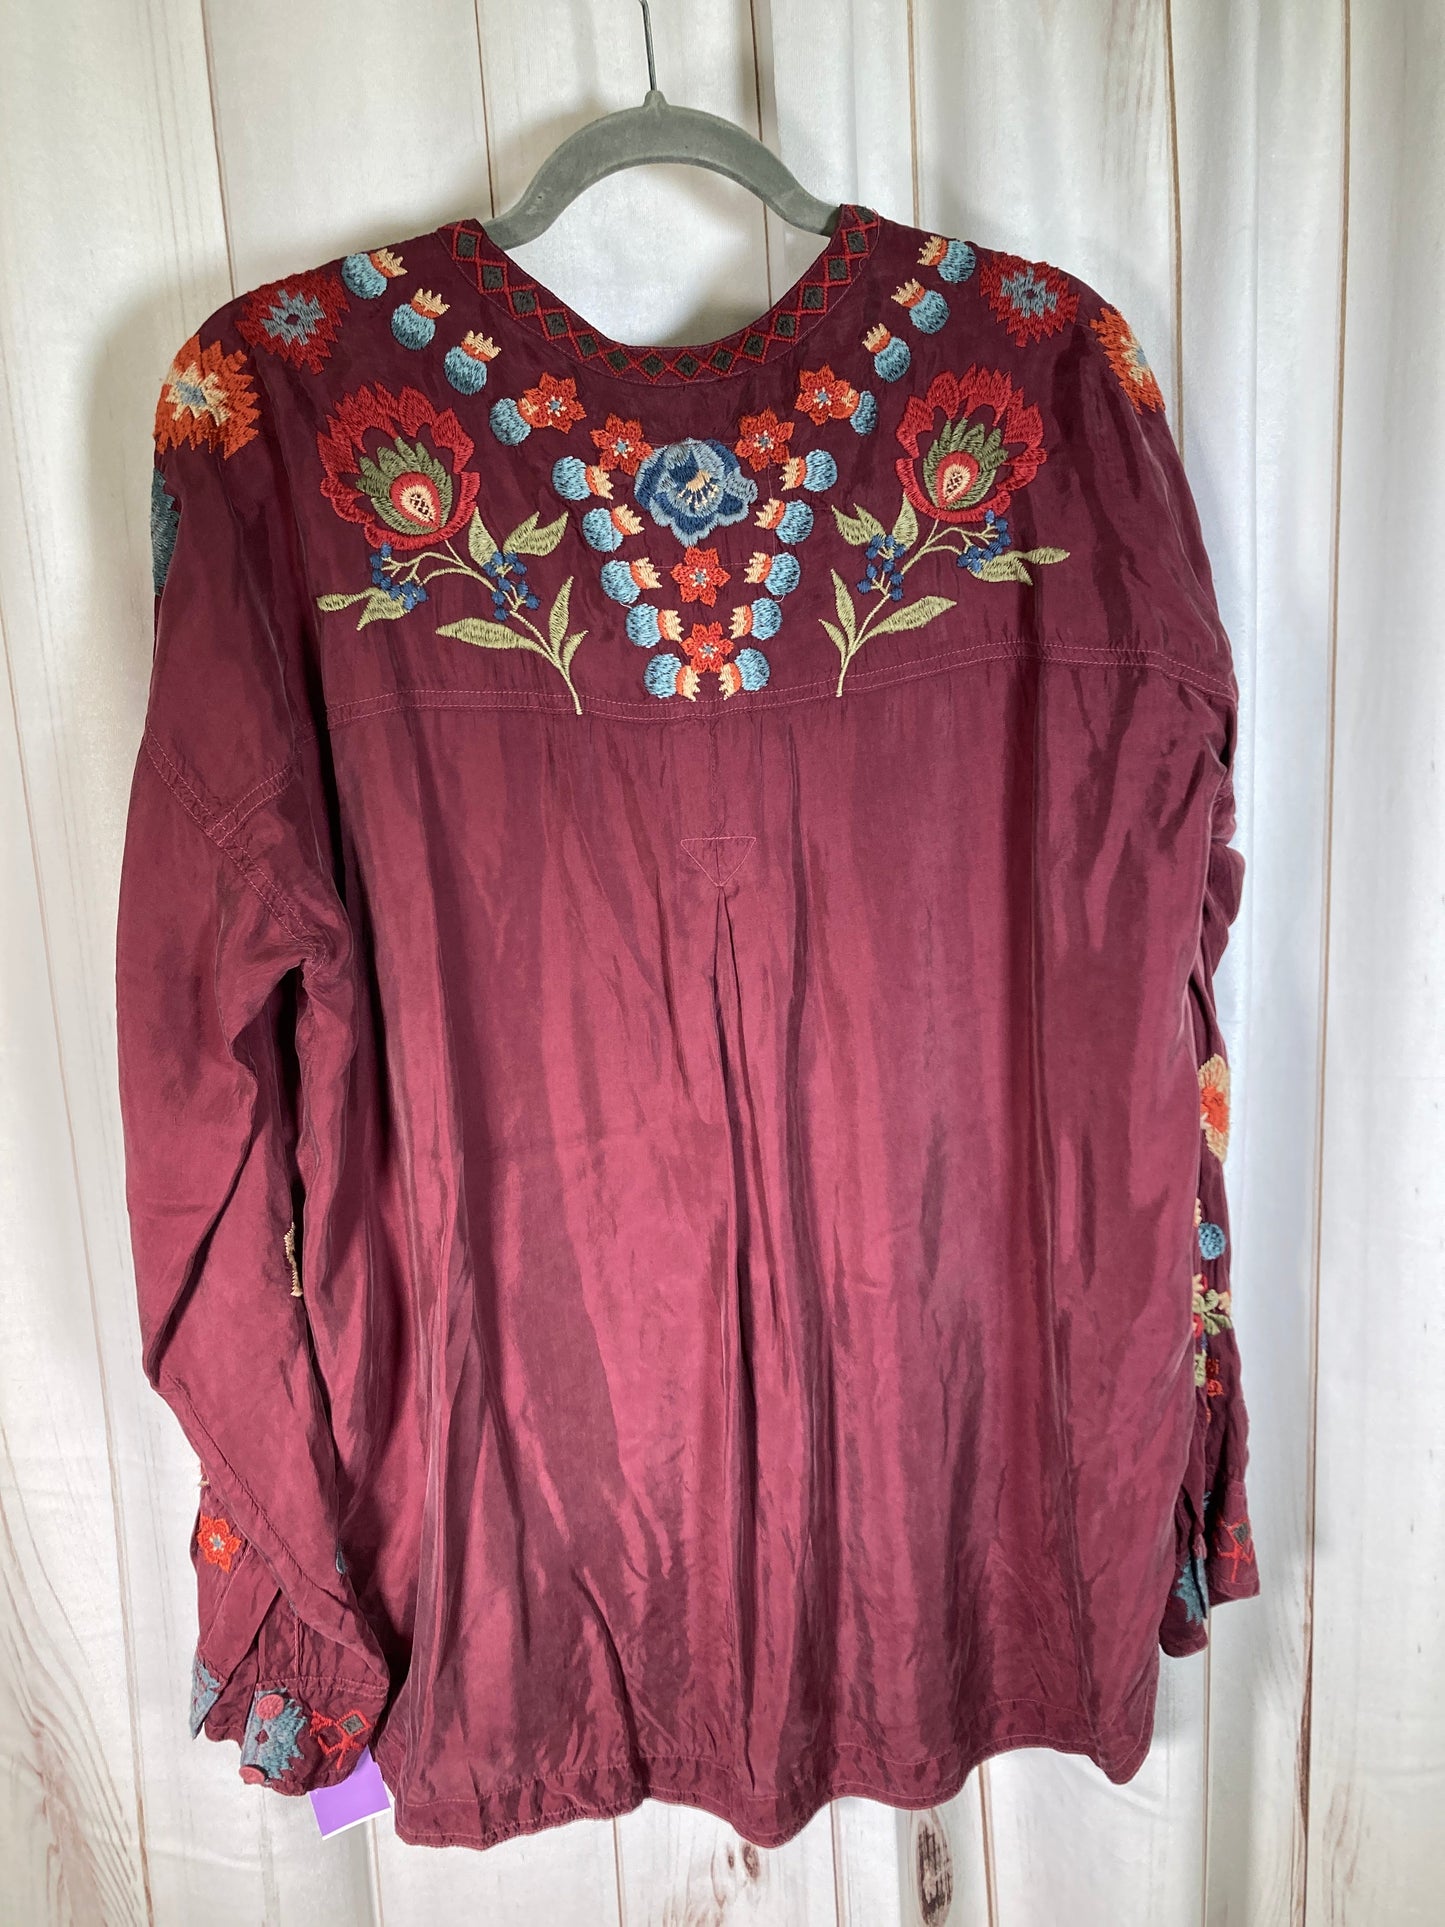 Red & Yellow Top Long Sleeve Designer Johnny Was, Size S